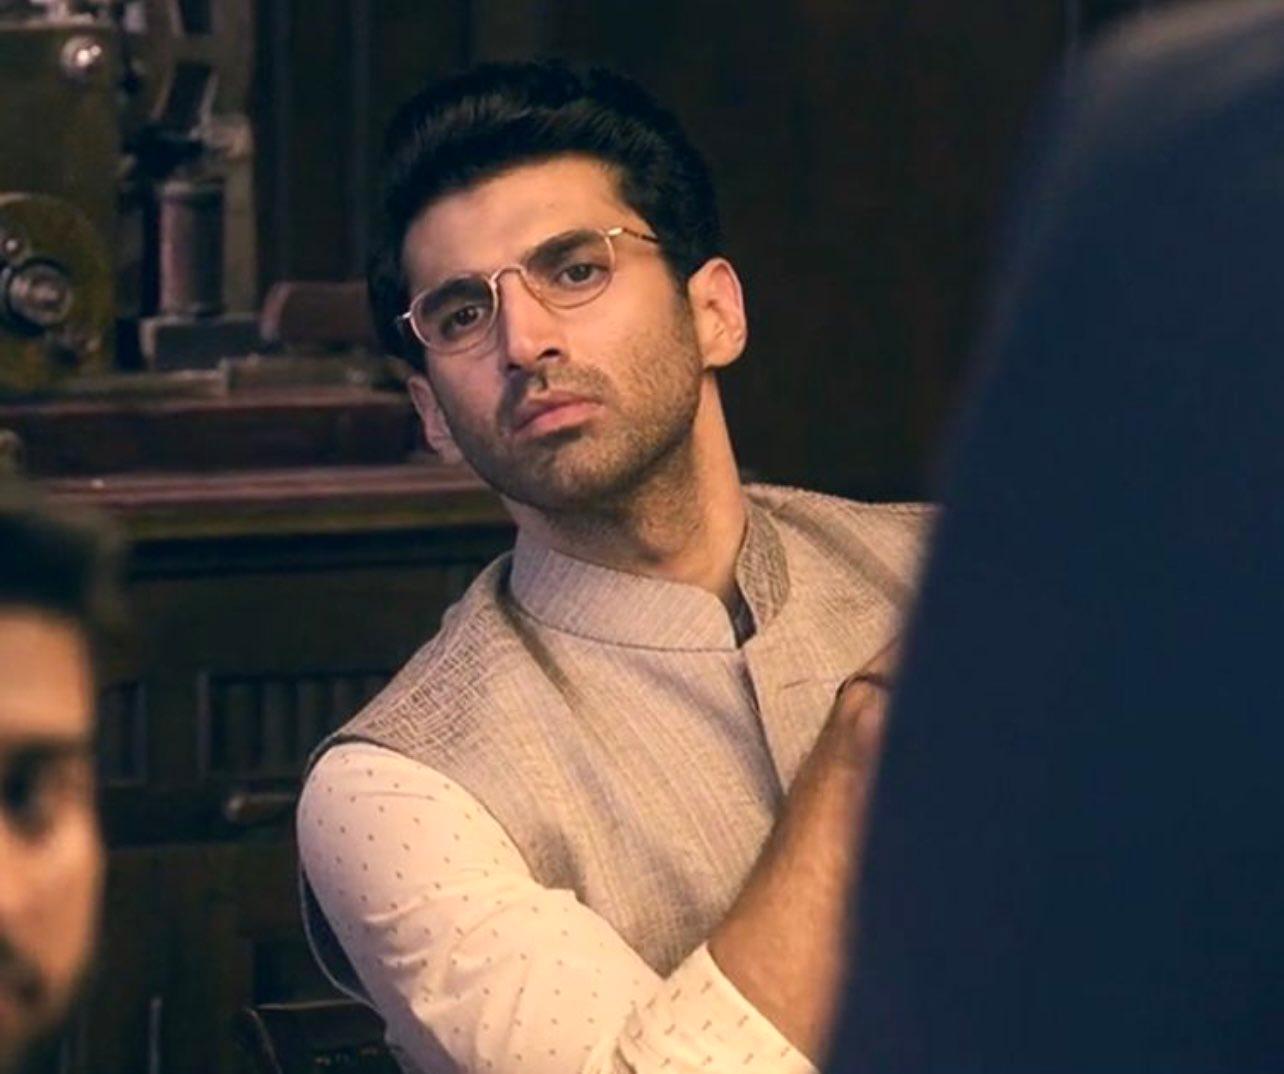 Although Kalank did not receive half the praise it deserved, Aditya Roy Kapur won the lottery of compliments over his looks in this movie